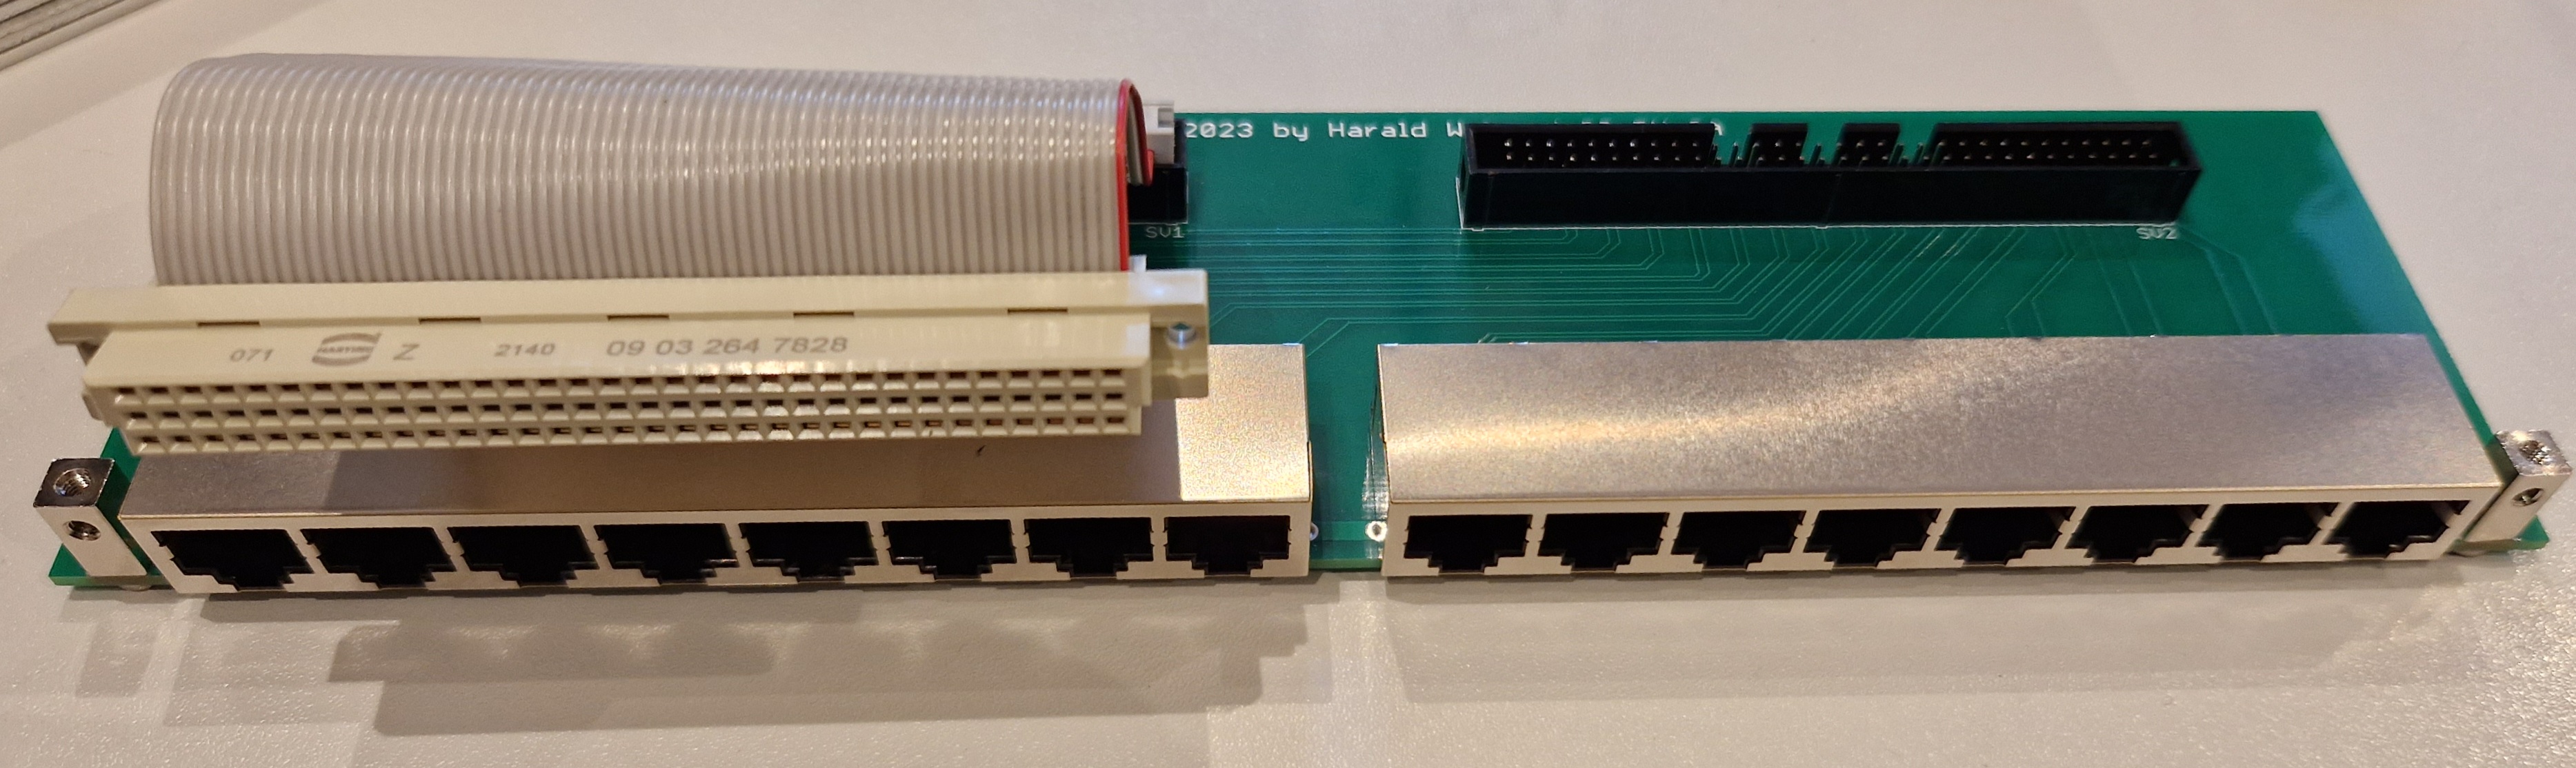 breakout board with ribbon cable